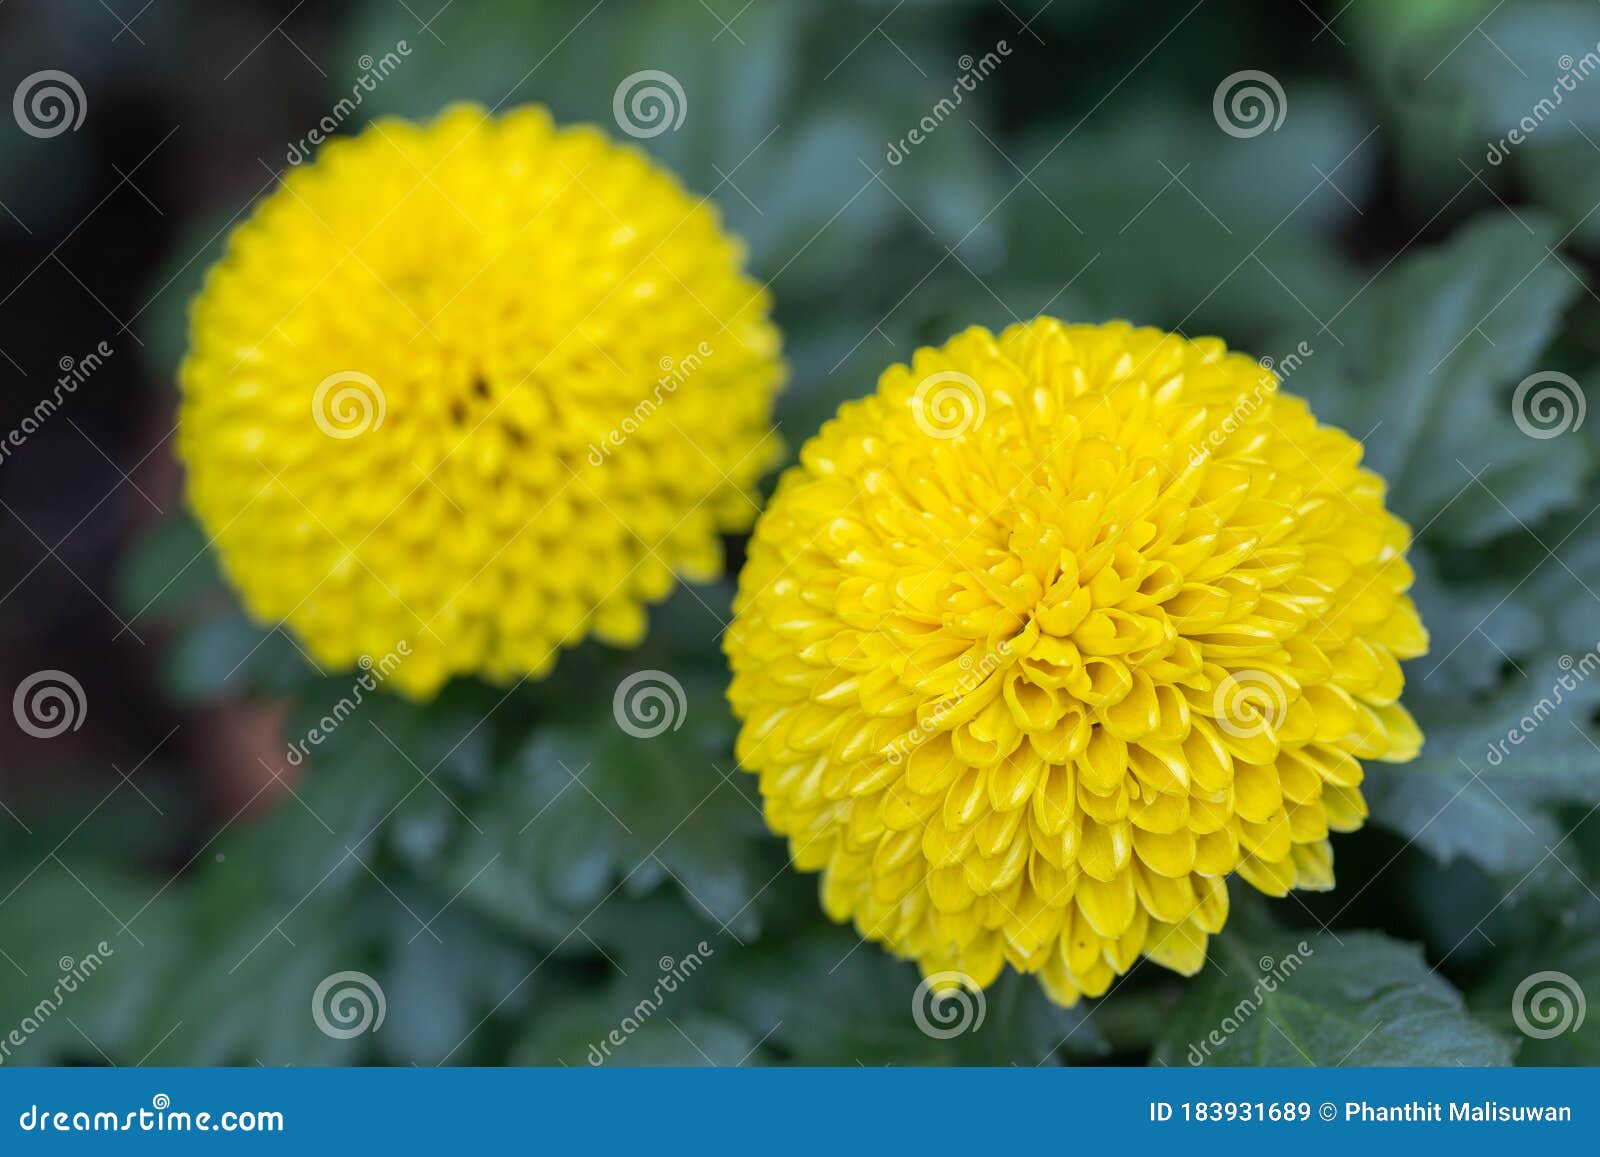 Pompom Chrysanthemums Flower In Garden At Sunny Summer Or Spring Day For Decoration Yellow Flower Stock Image Image Of Closeup Detail 183931689